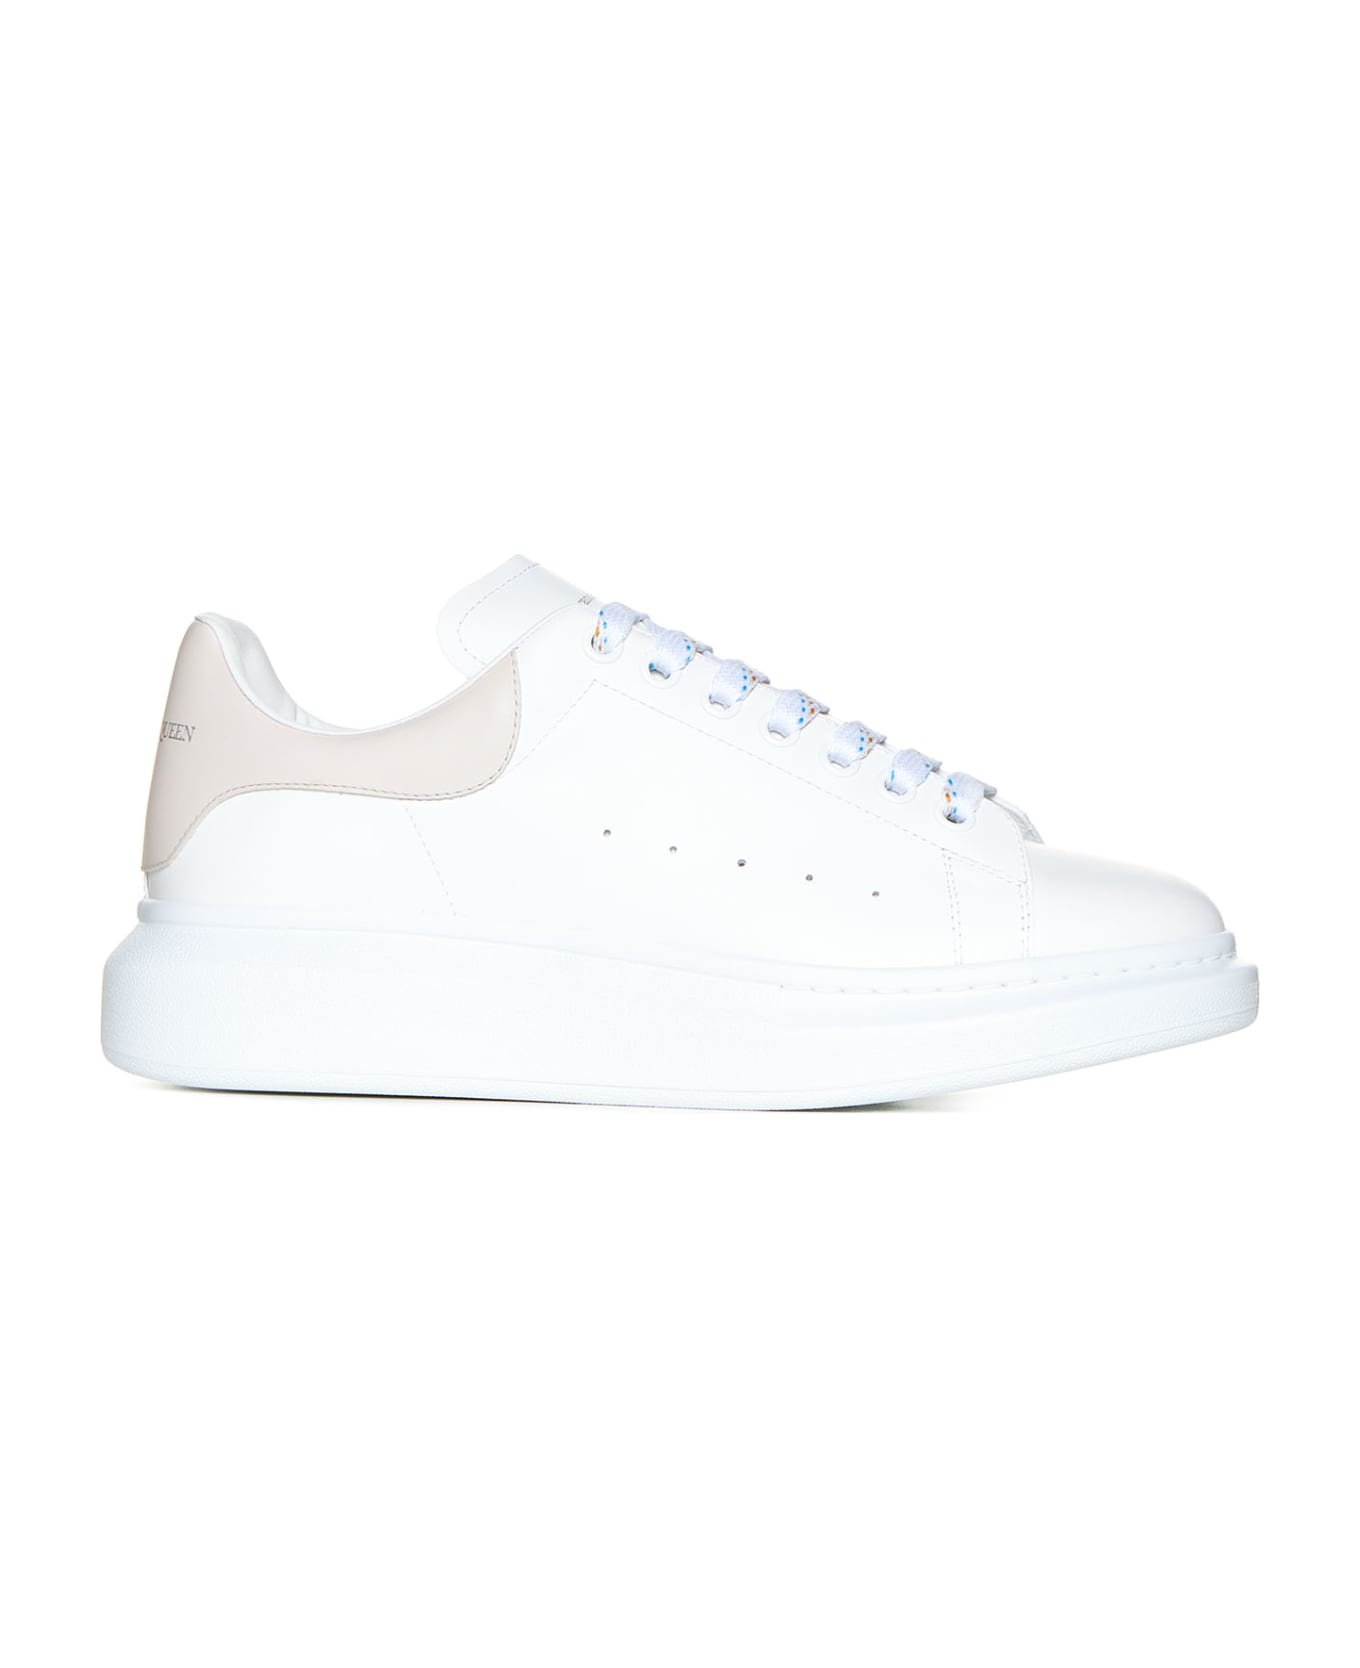 Alexander McQueen Lace-up Low Top Sneakers - White スニーカー